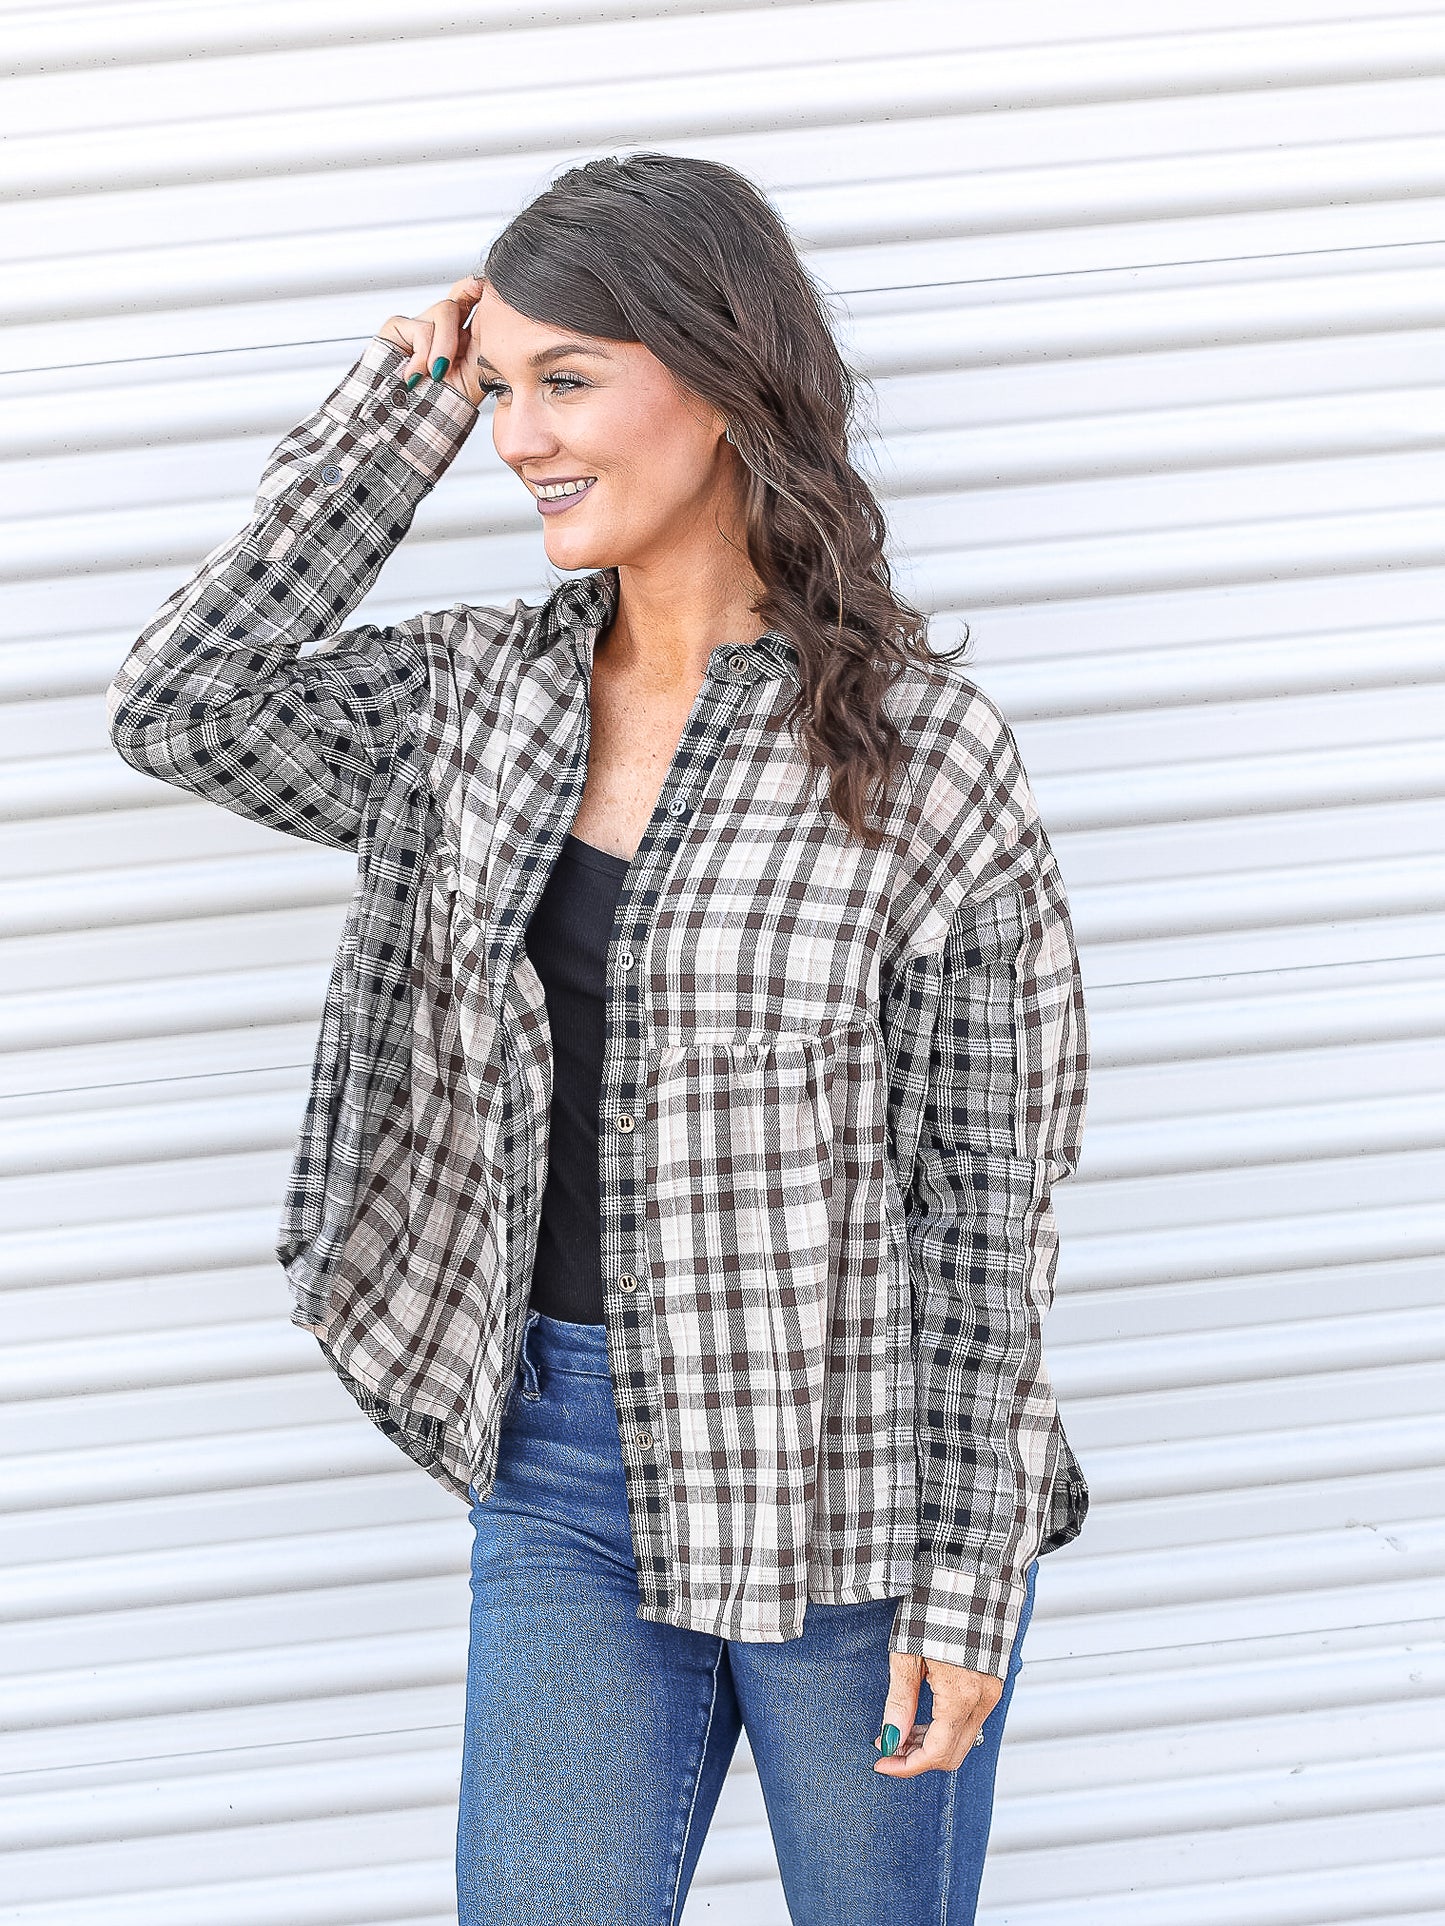 Plaid button up baby doll top paired with a tank top and jeans